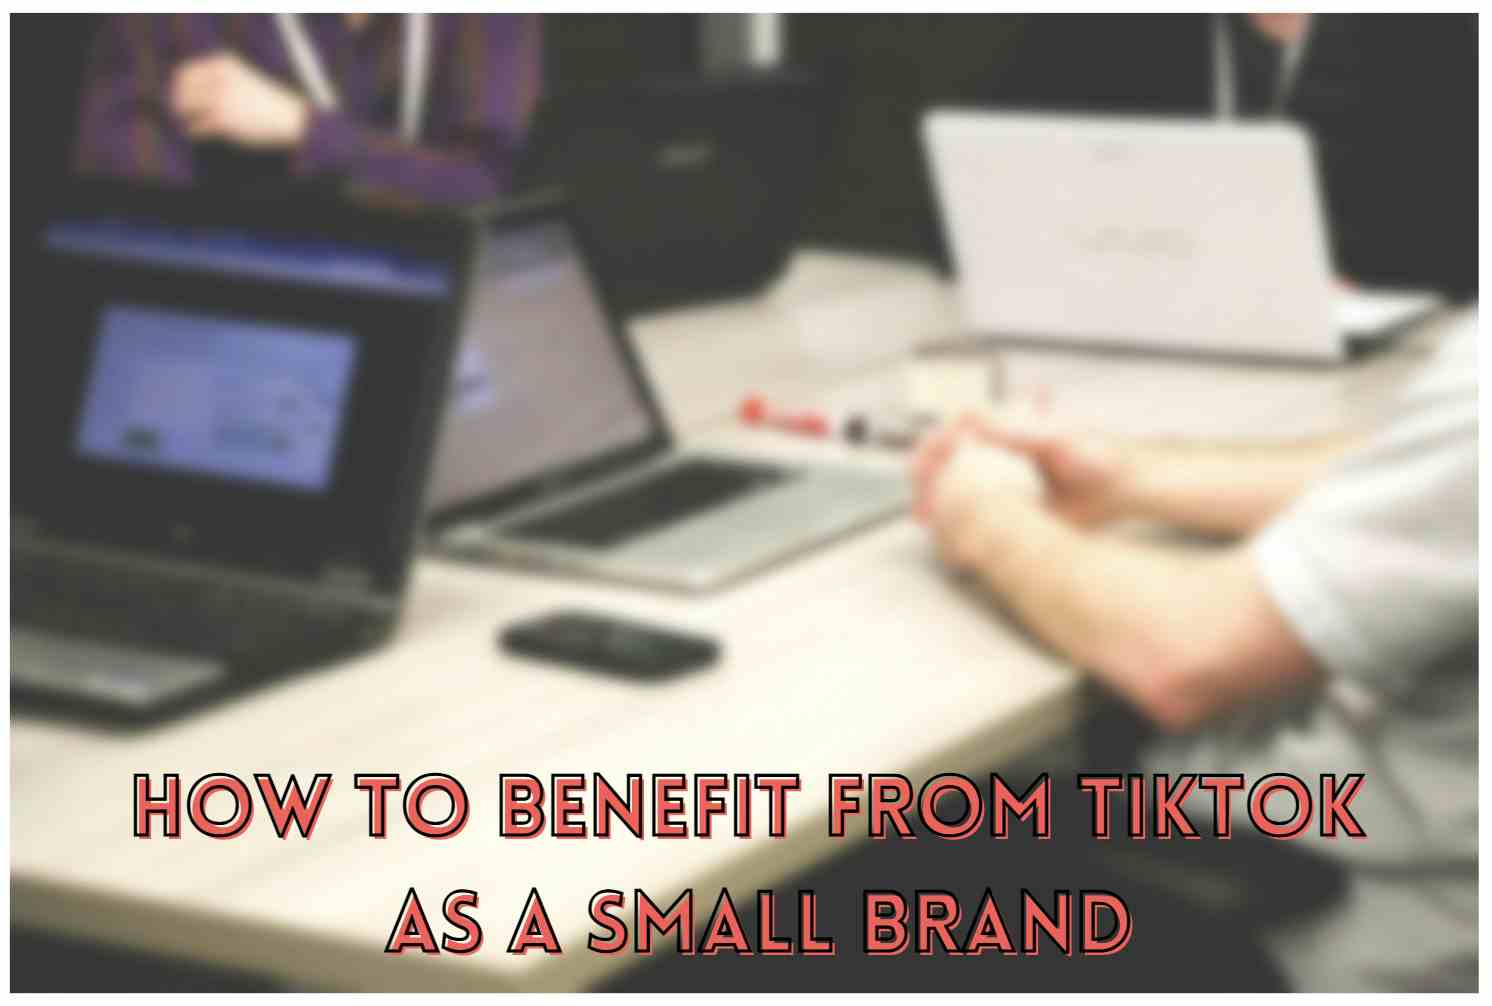 How to benefit from TikTok as a small brand